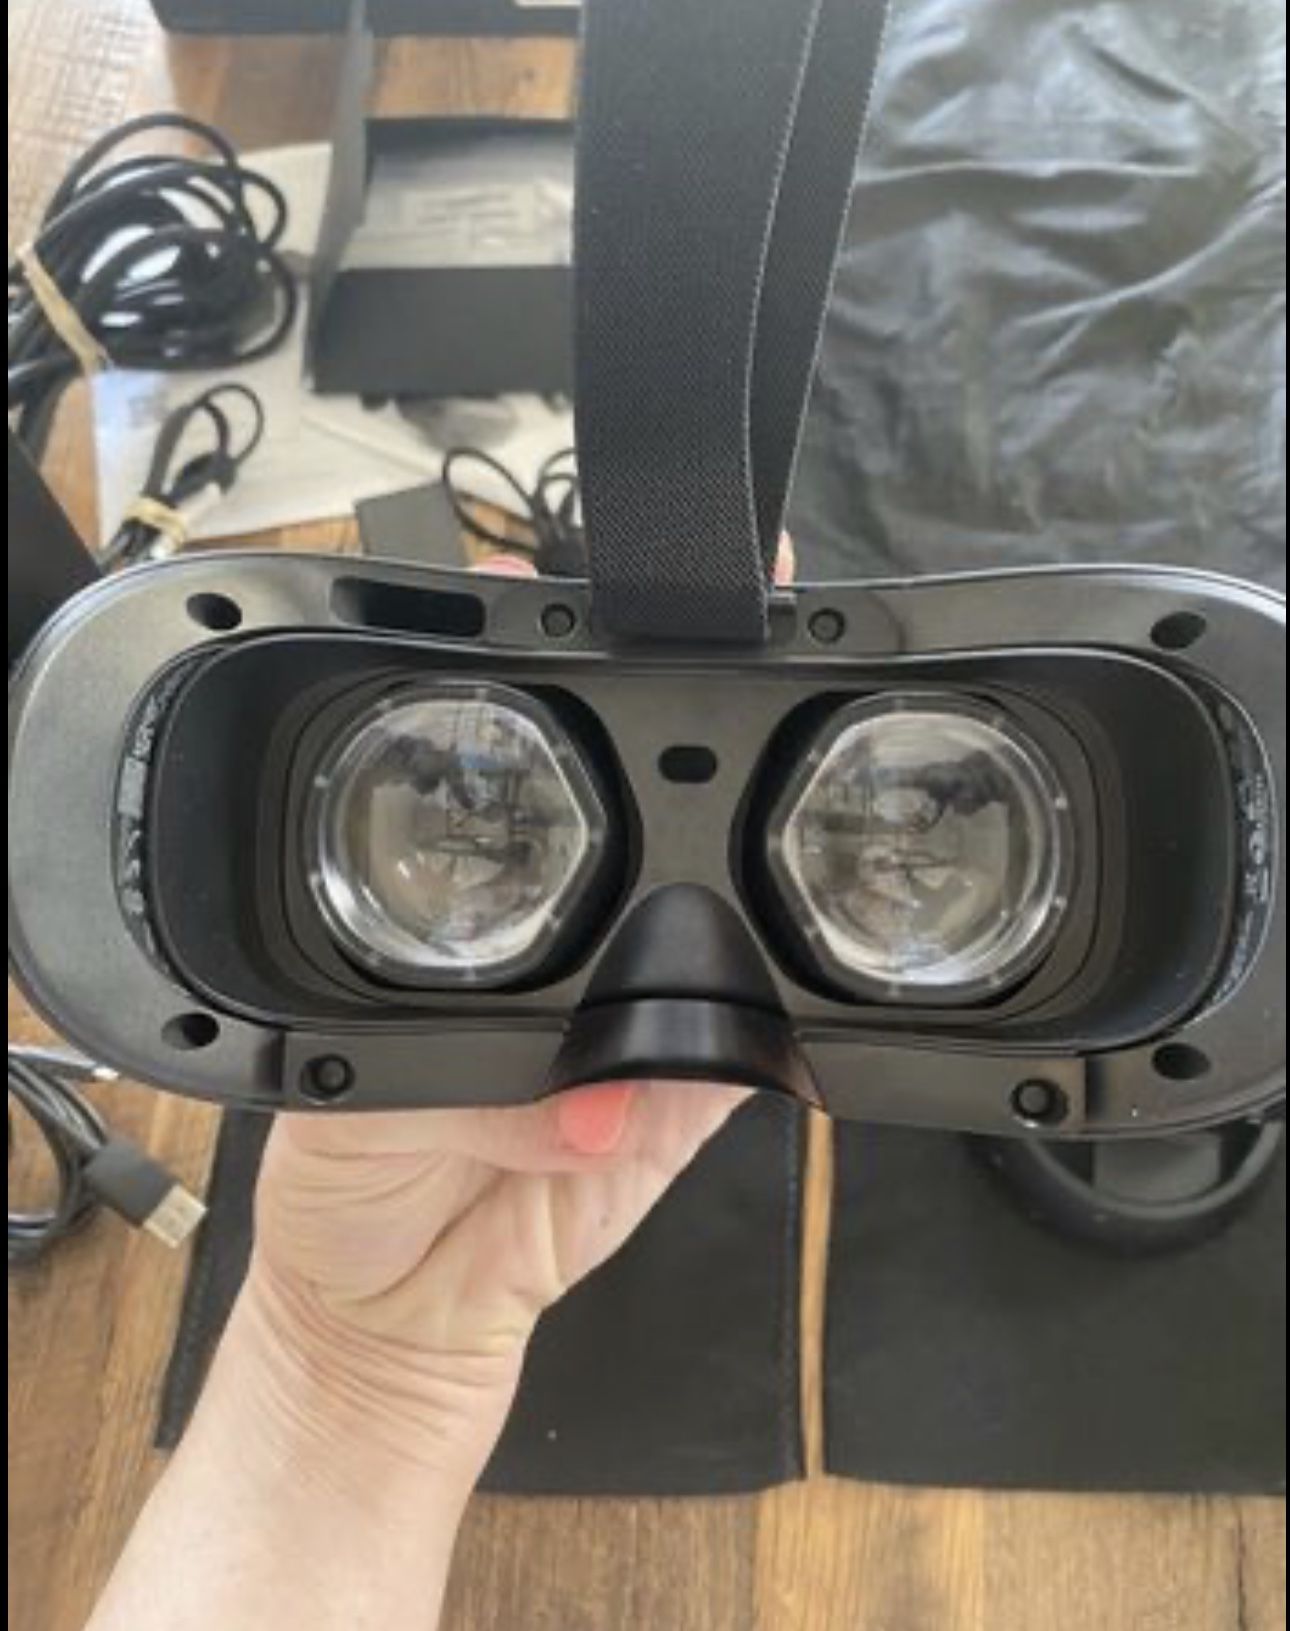 G2 VR Headset - Like New, Includes All Accessories